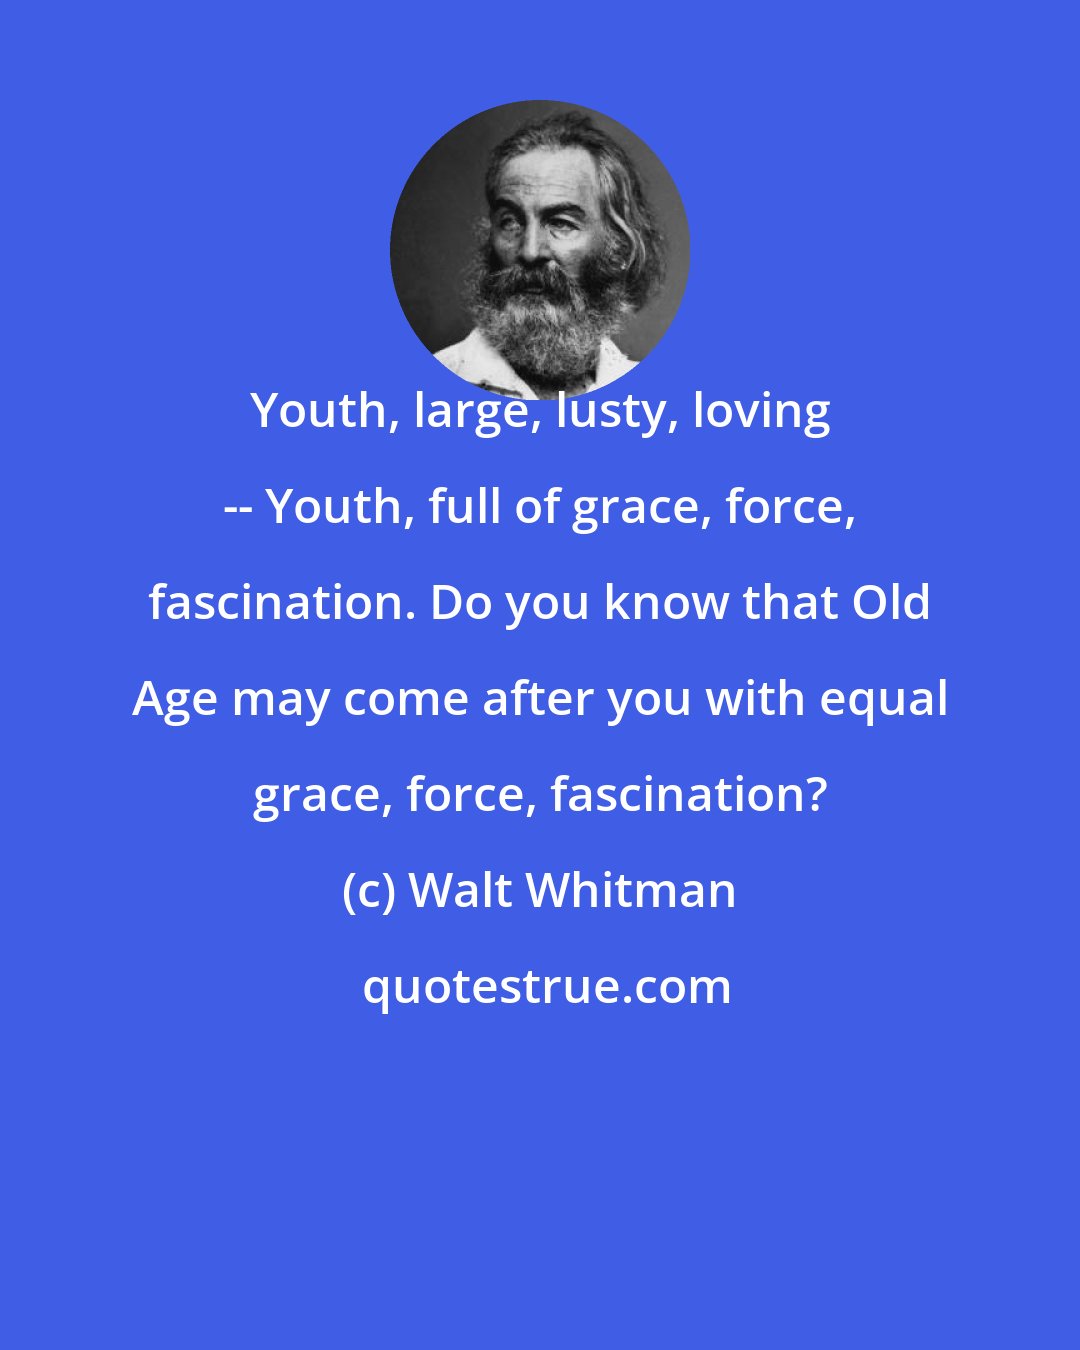 Walt Whitman: Youth, large, lusty, loving -- Youth, full of grace, force, fascination. Do you know that Old Age may come after you with equal grace, force, fascination?